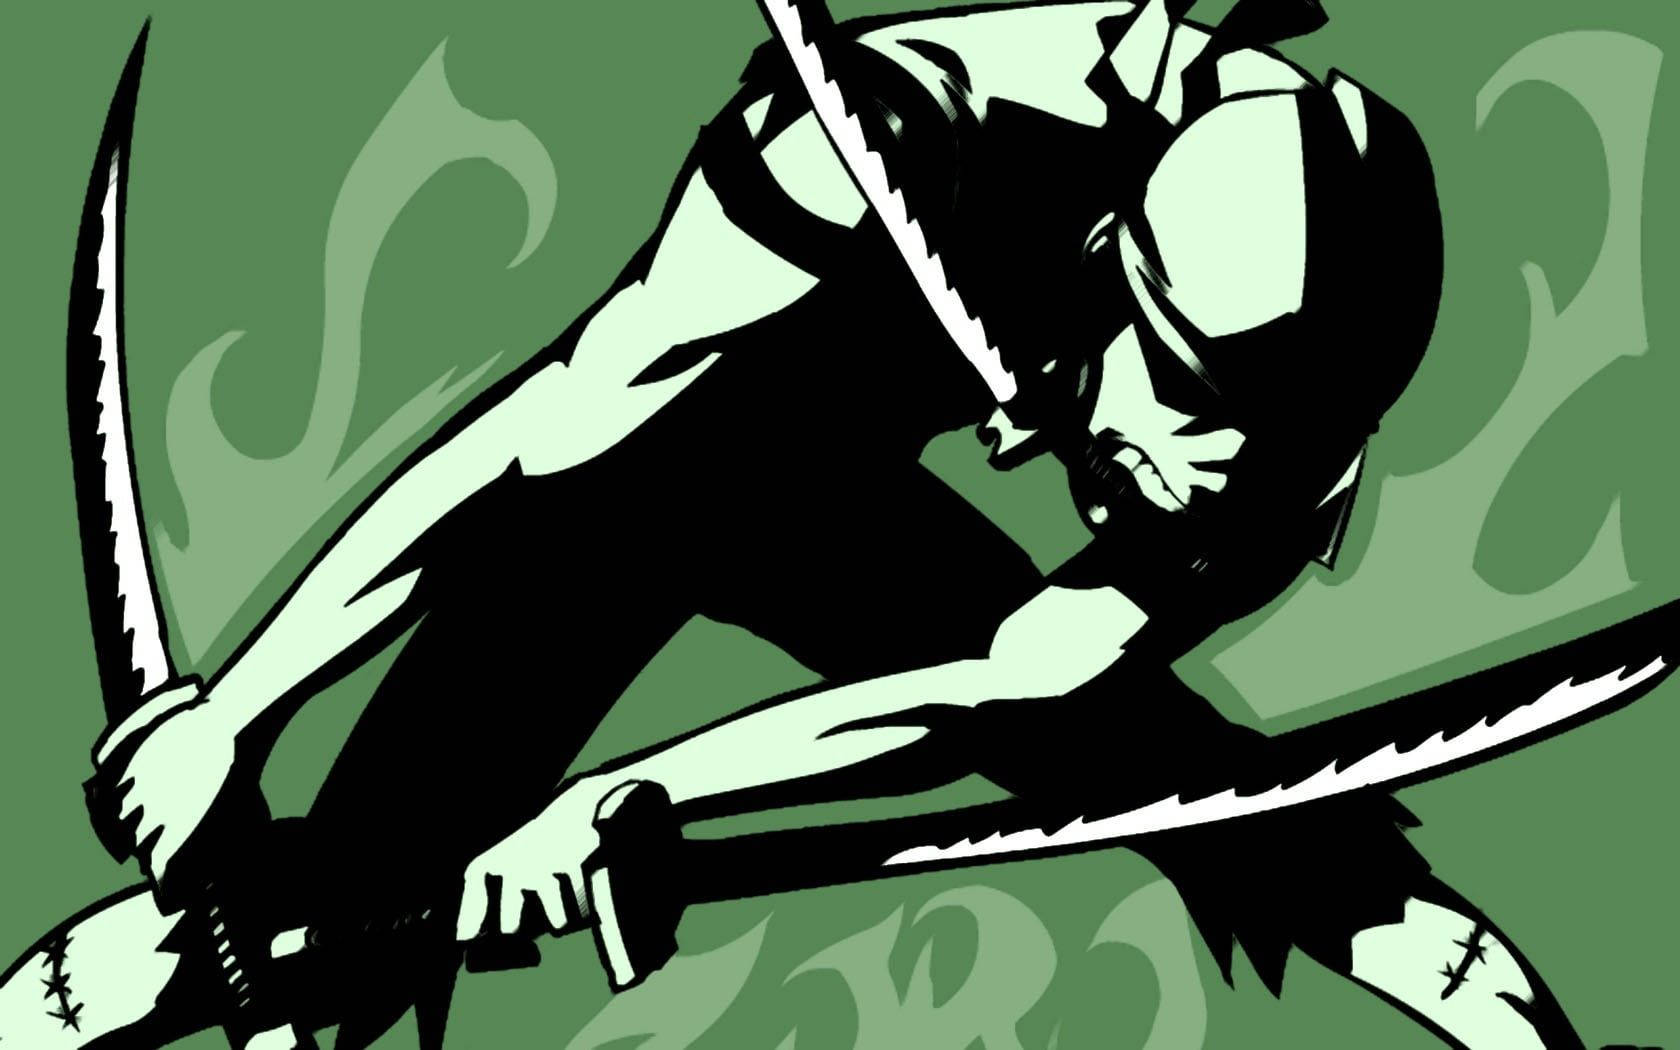 A Black silhouette of Zoro, the sword-wielding warrior, ready to take on all challenges. Wallpaper